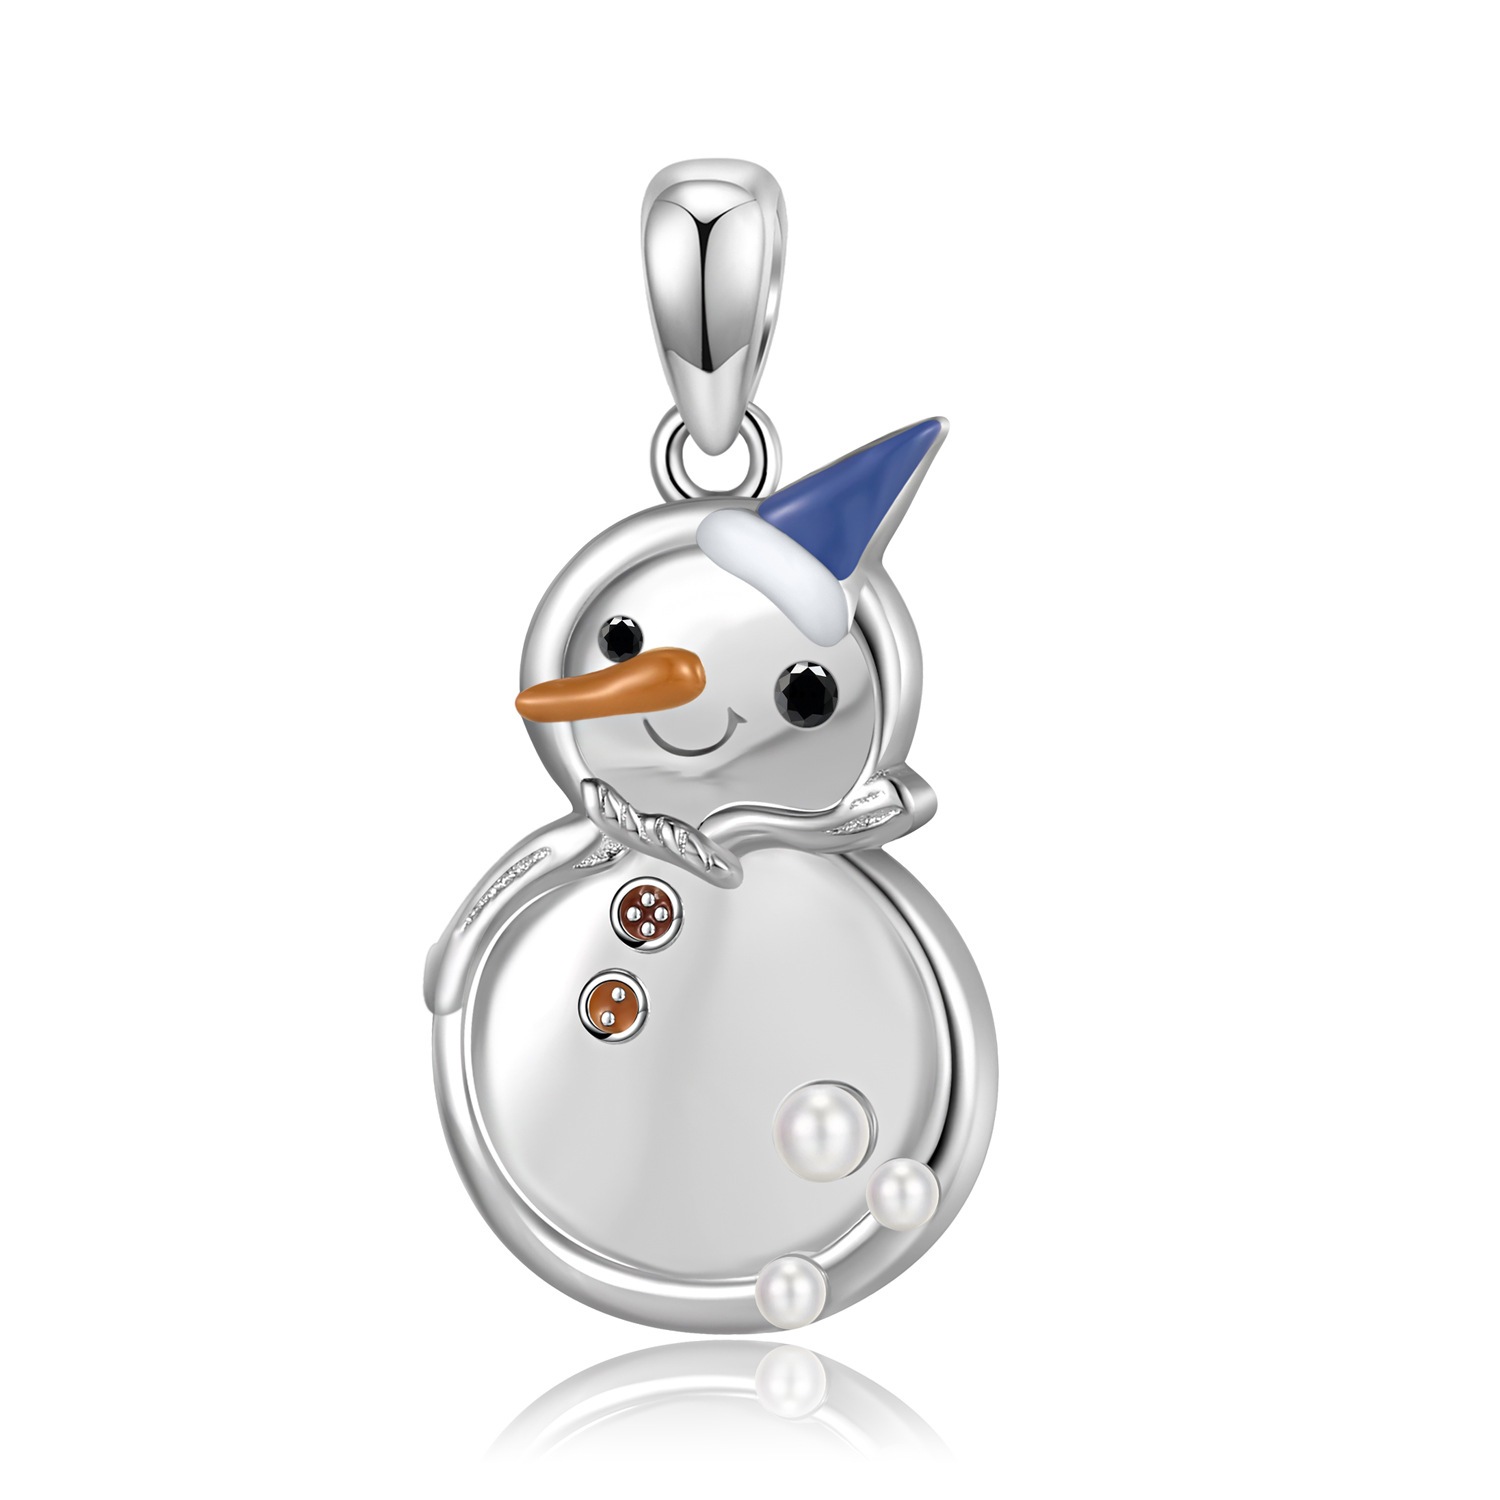 Cute Snowman Handmade Series S925 Sterling Silver Necklace